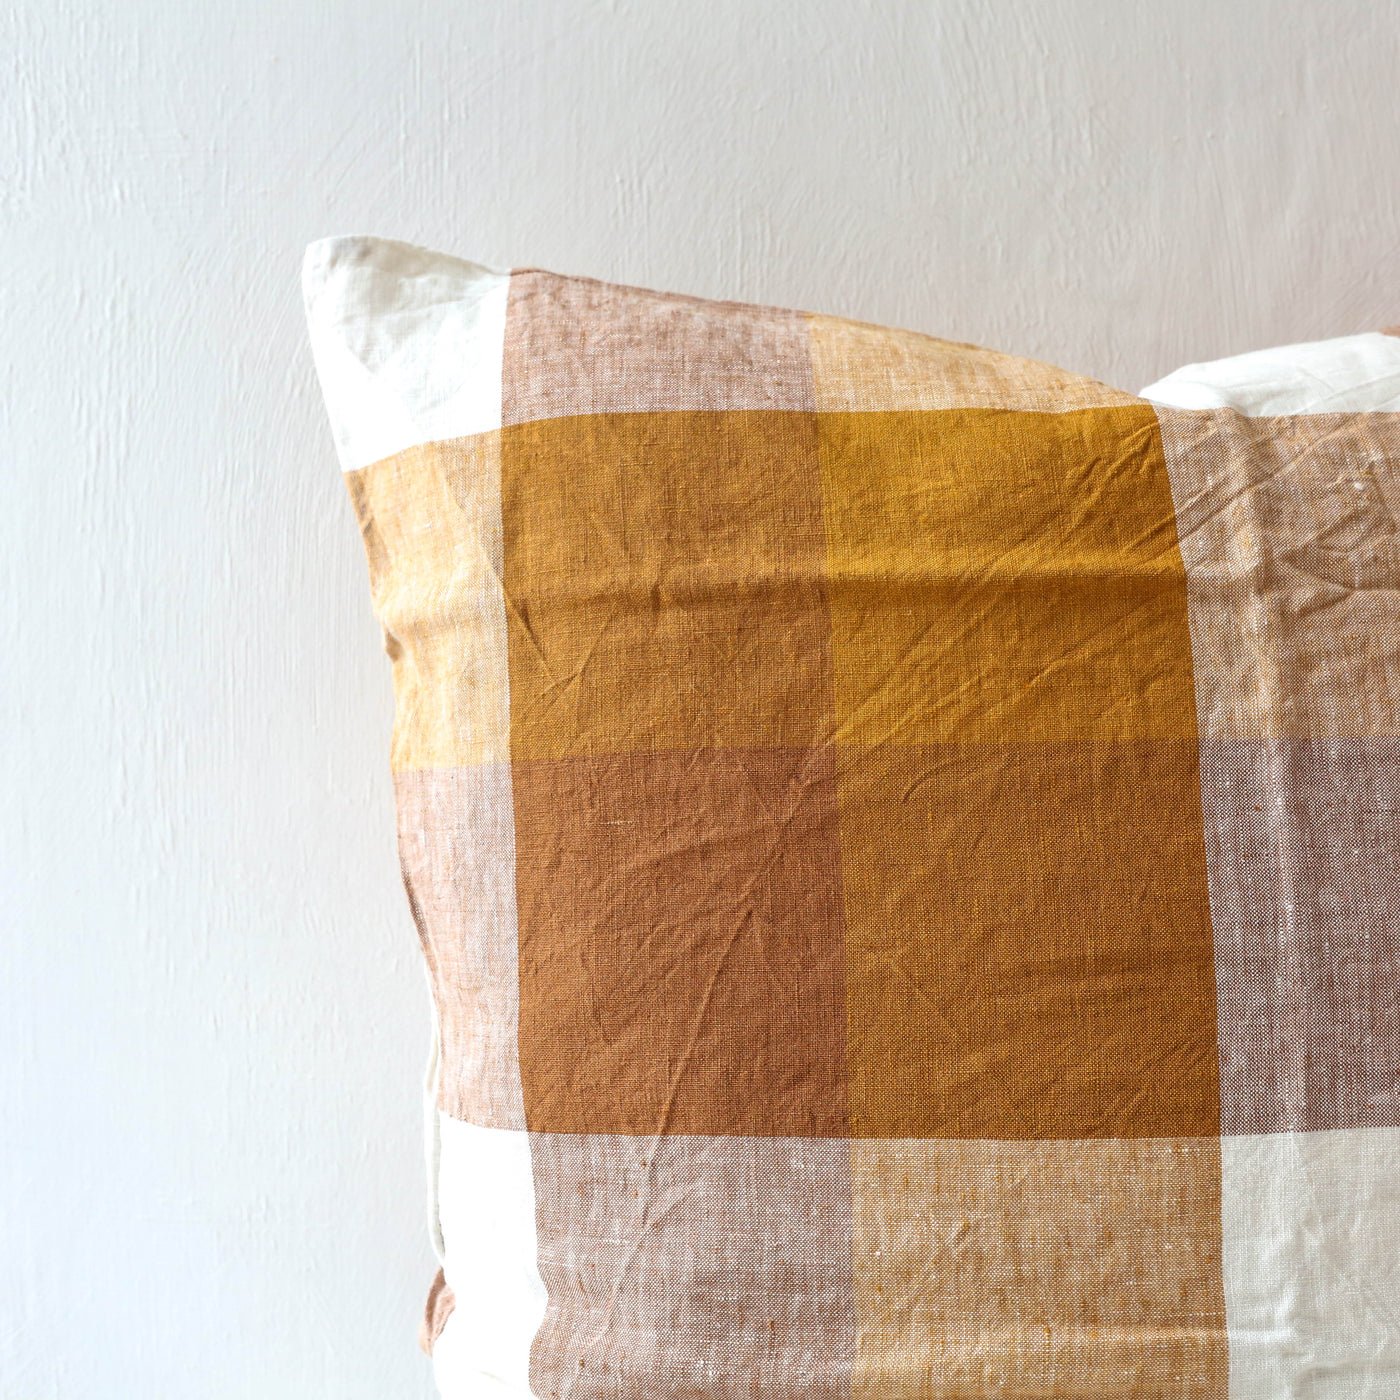 'Biscuit' Check Linen Cushion Cover